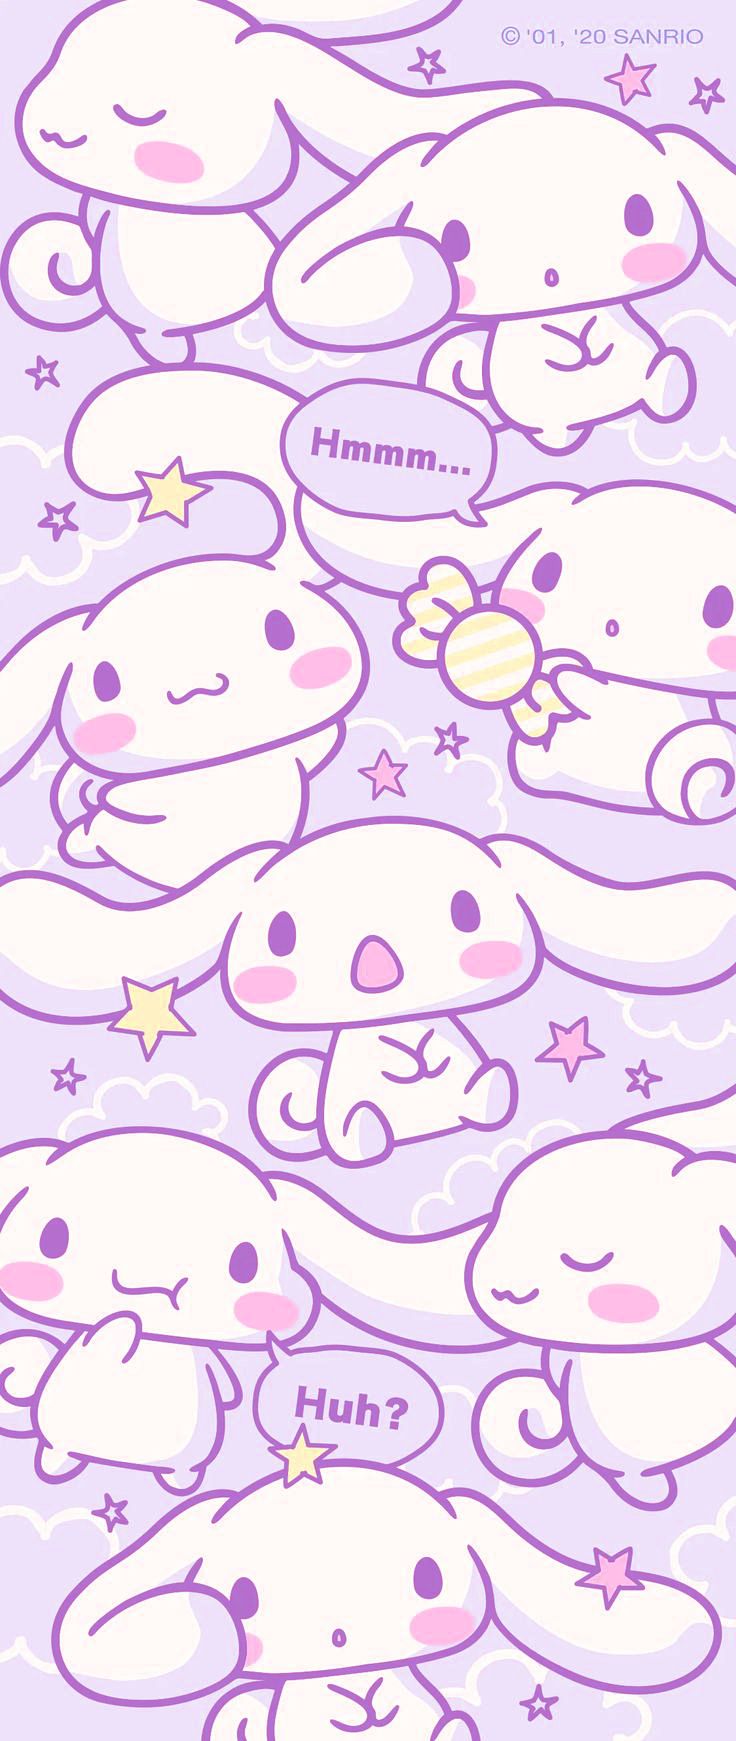 A wallpaper of Cinnamoroll from Sanrio, who is a cute little white puppy with a pink nose and ears, wearing a pink dress and holding a candy. - Cinnamoroll